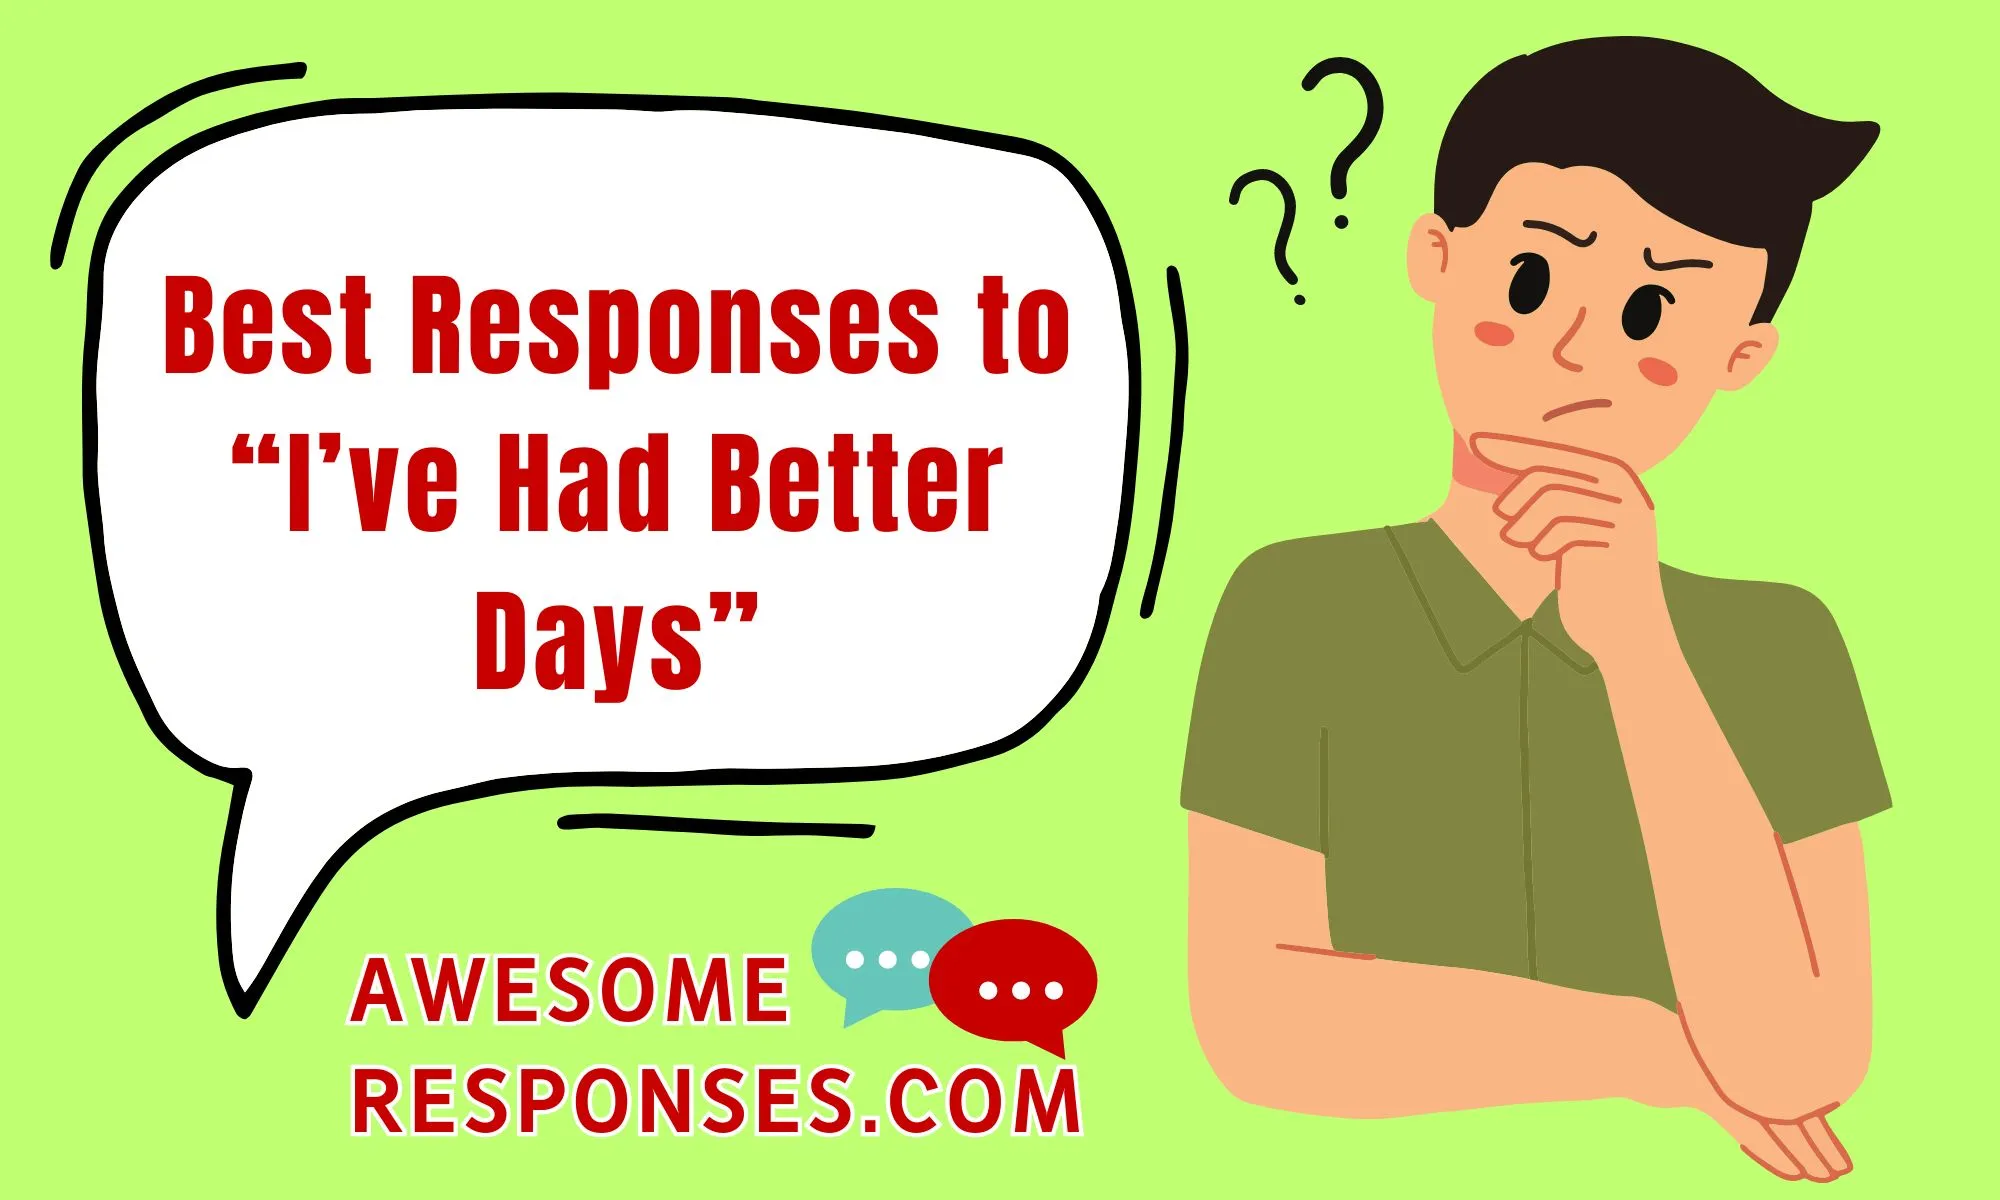 Best Responses to “I’ve Had Better Days”